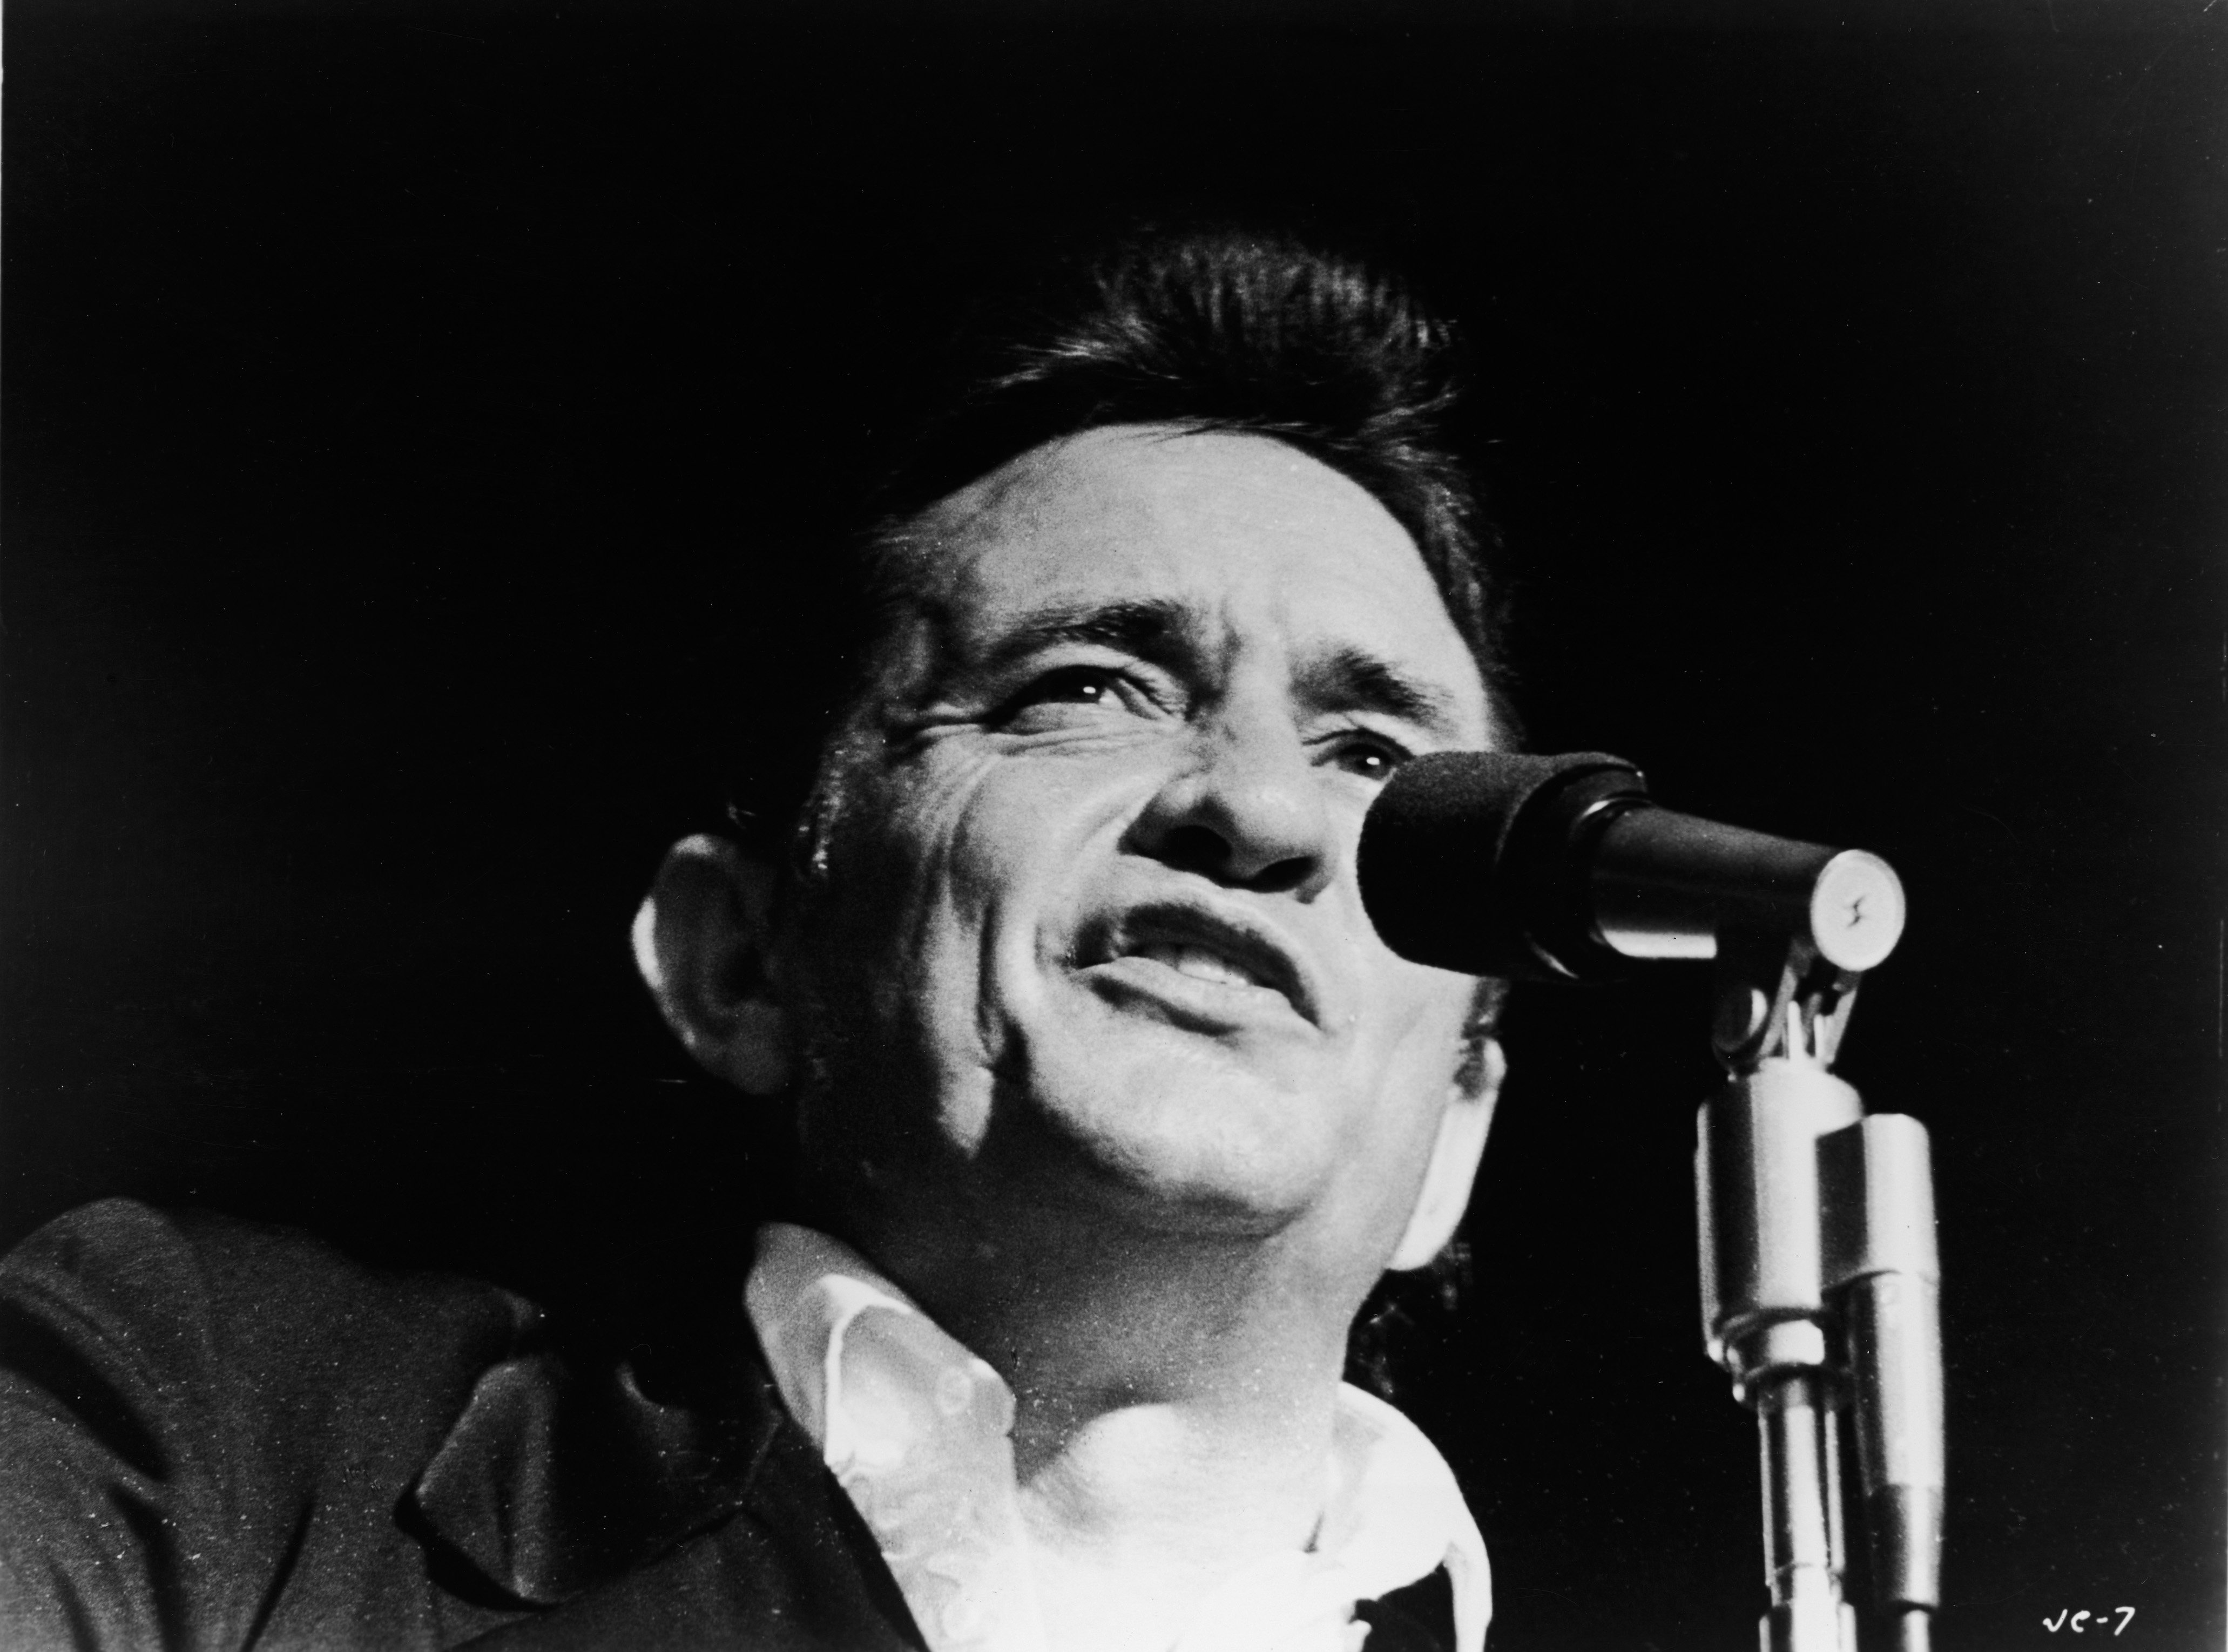 Johnny Cash singing in front of a microphone. 